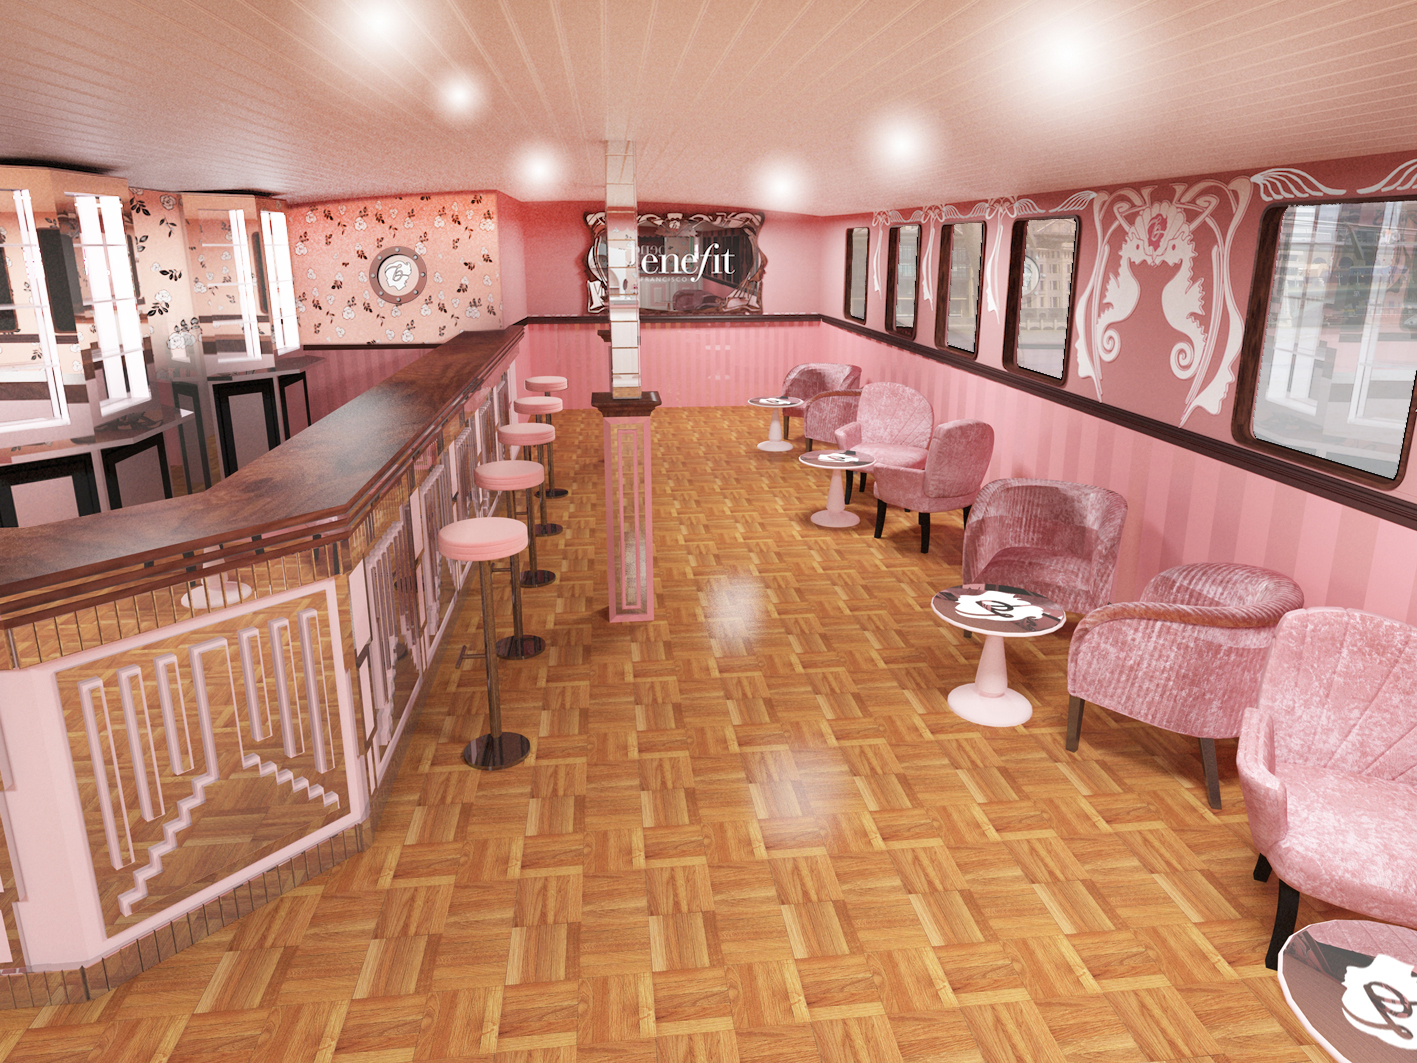 The Pinkton Parlour will host different events and concepts